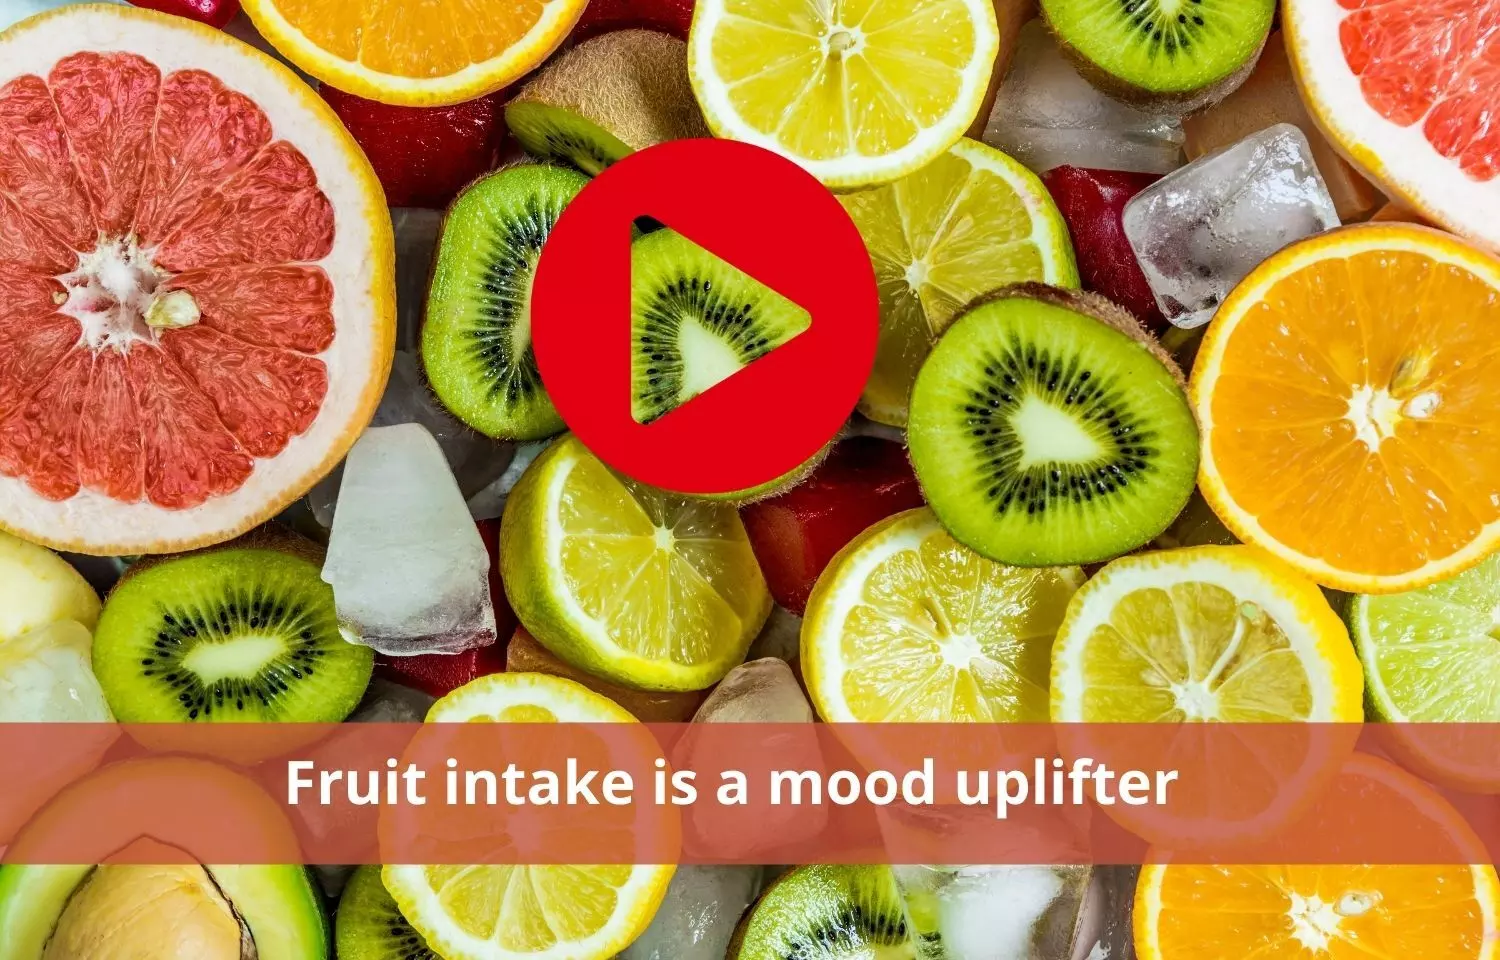 Fruit intake to improve ones mood, and stress